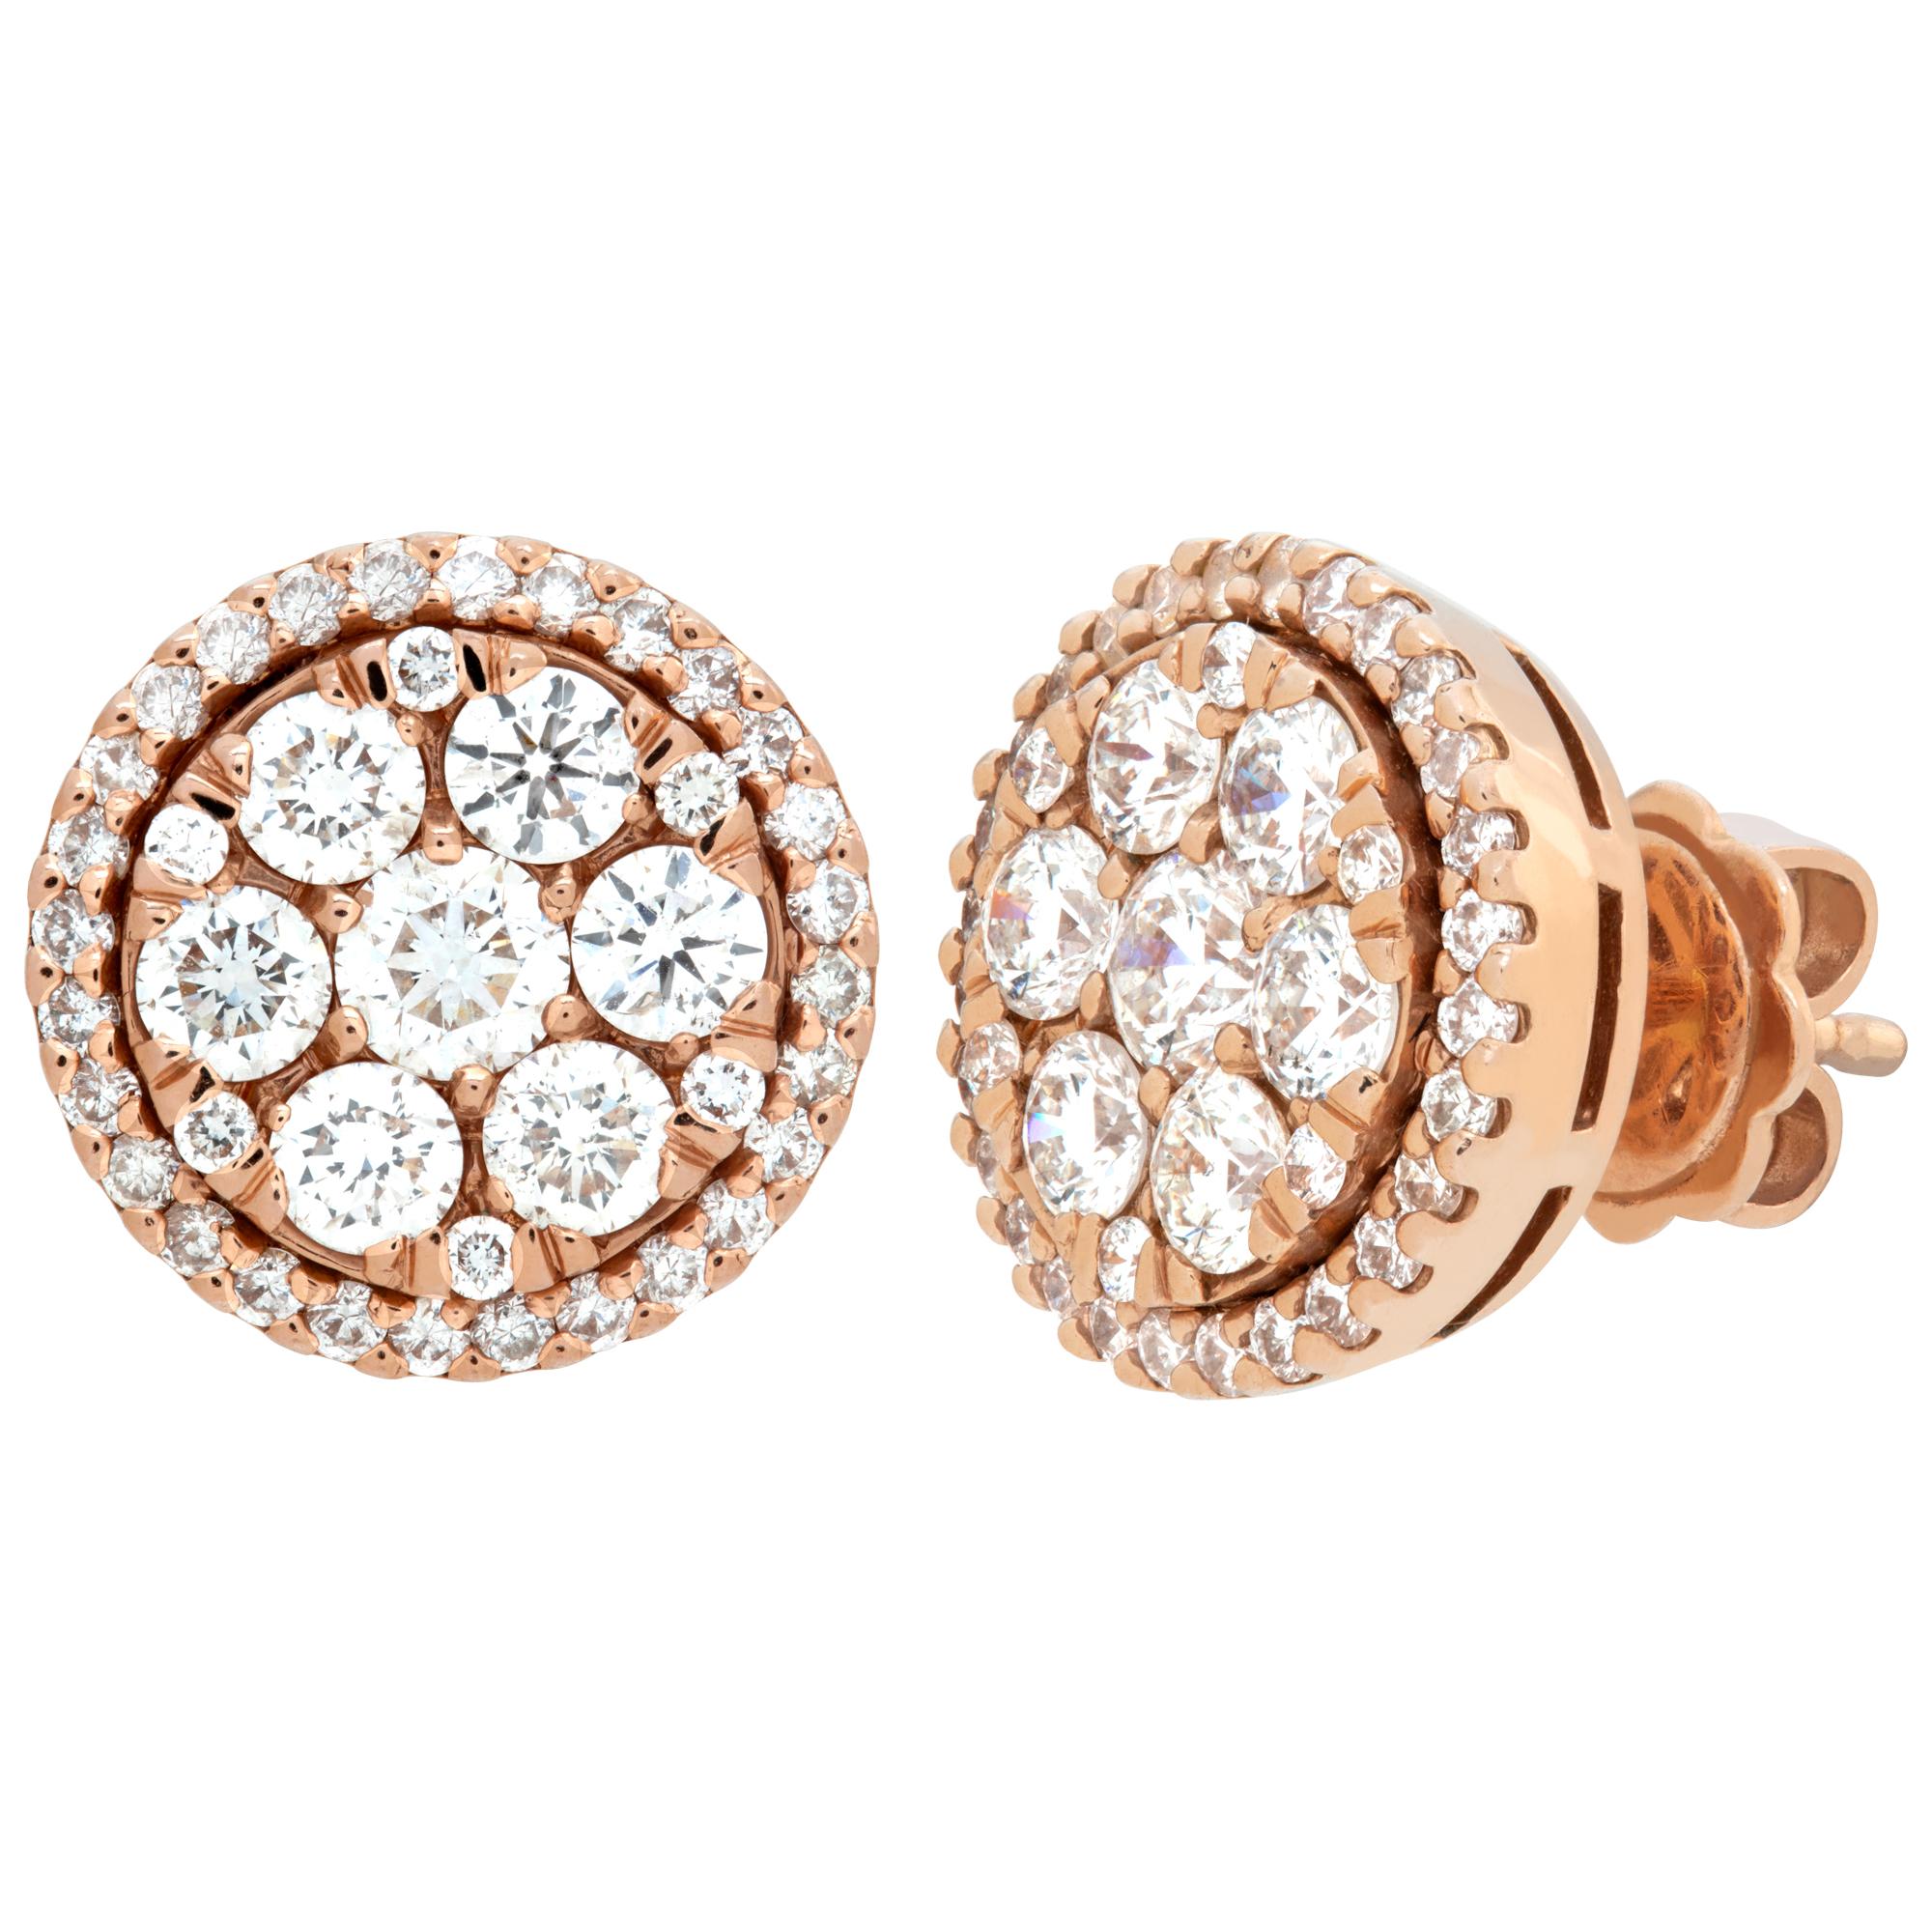 Diamond studs in 14k rose gold with over 2 carats in G-H color, VS clarity round cut Illusion set diamonds. Size 0.50 inches x 0.50 inches.